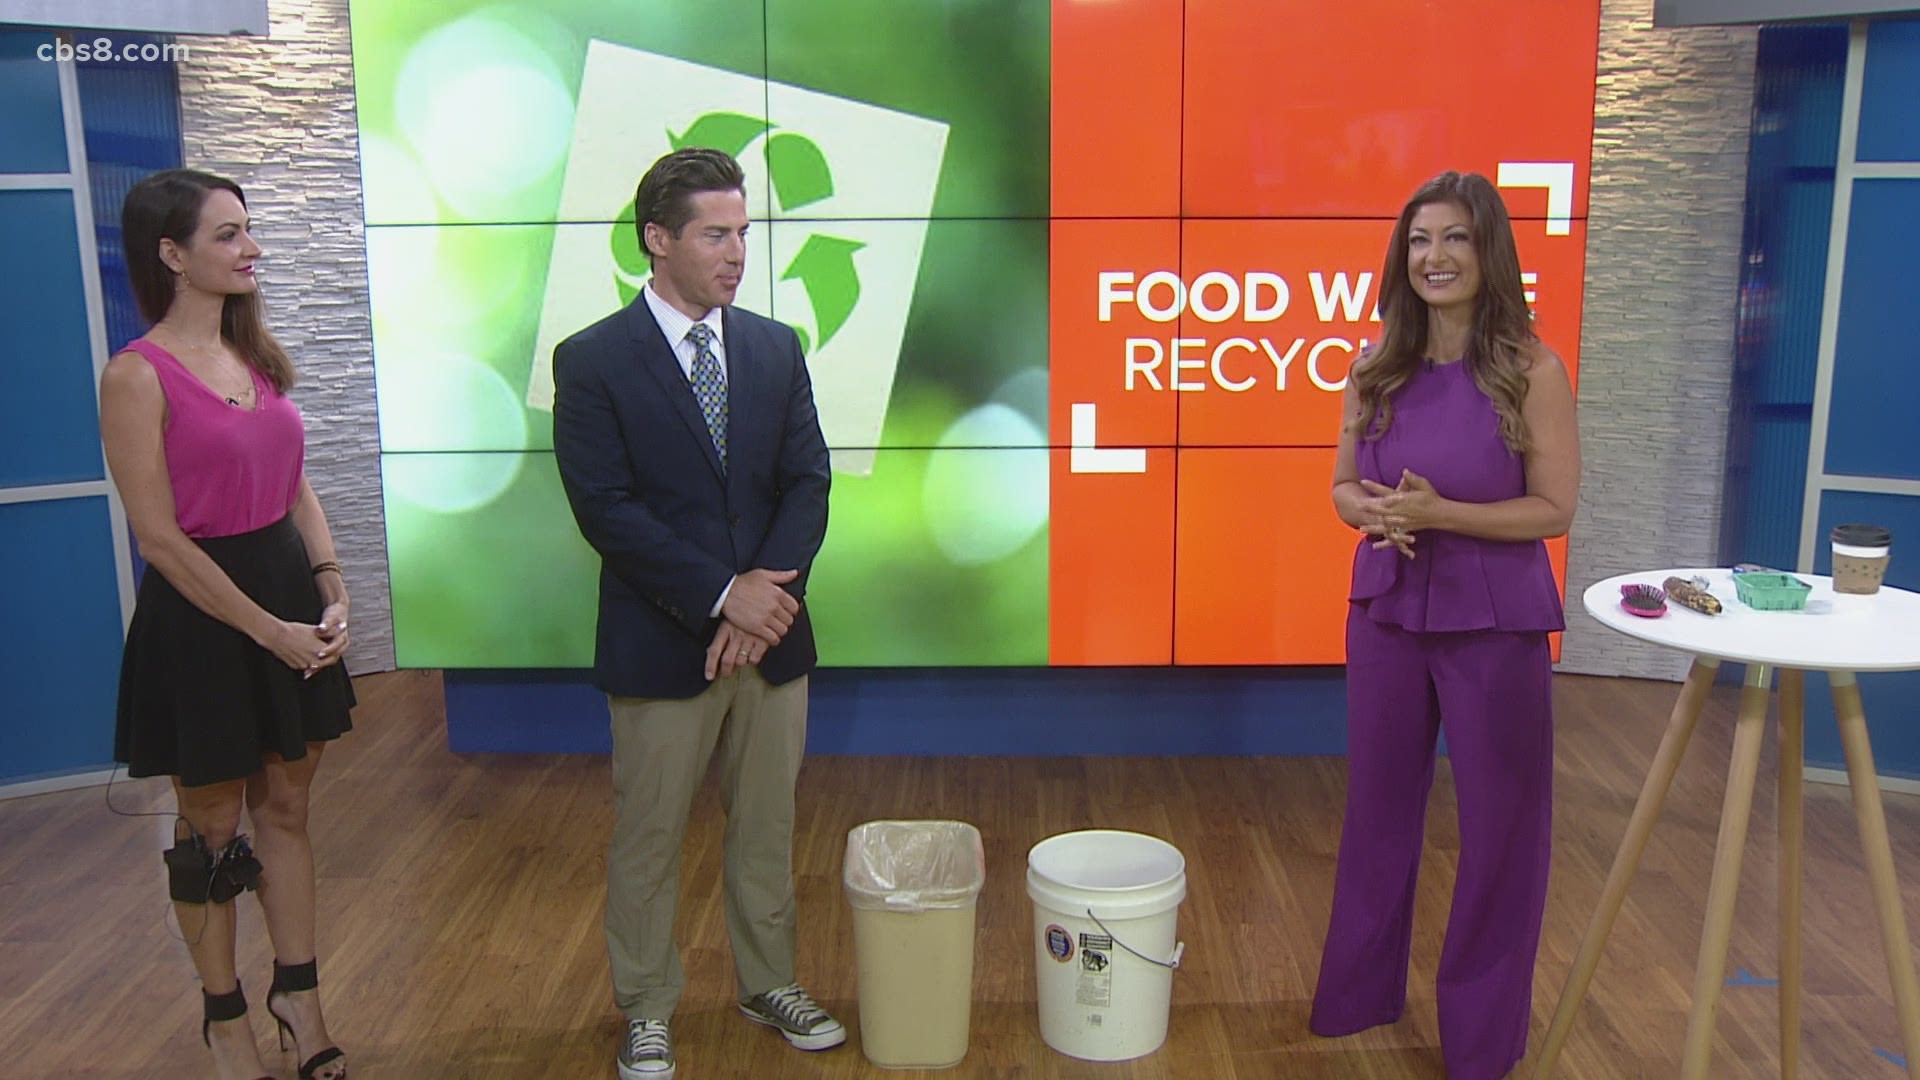 With the new law mandating compost beginning in 2022, Neda Iranpour puts Eric and Jenny to the test on what you can and can't compost.